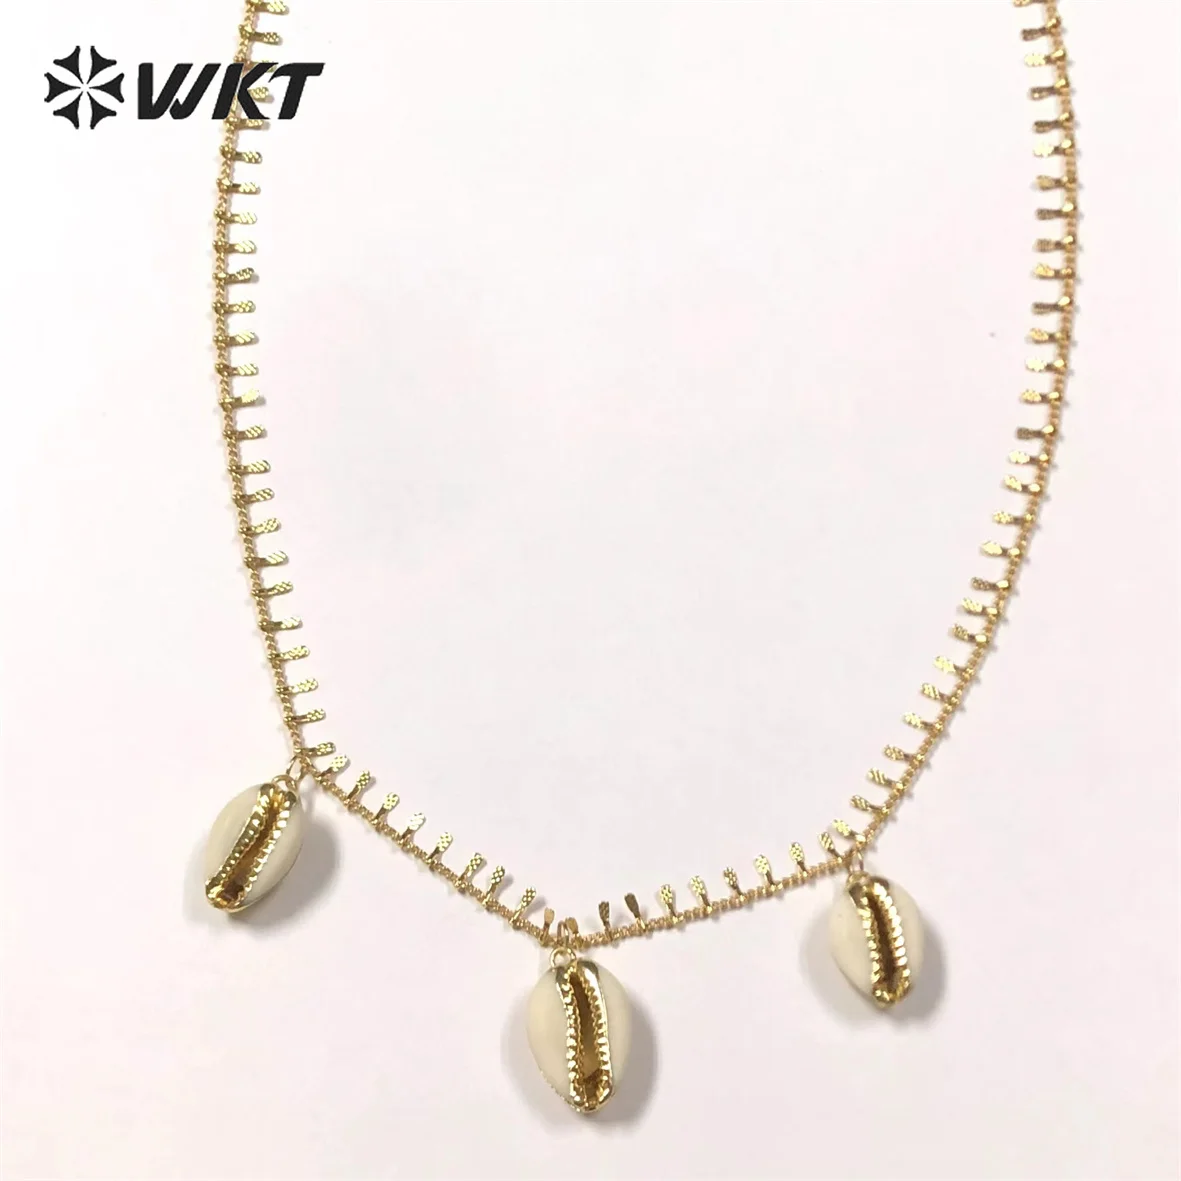 

WT-JN175 WKT Unique Design Gold Plated Necklace Natural Cowrie Small Leaf Brass Chain For Ladies Jewelry Gift Purchasing